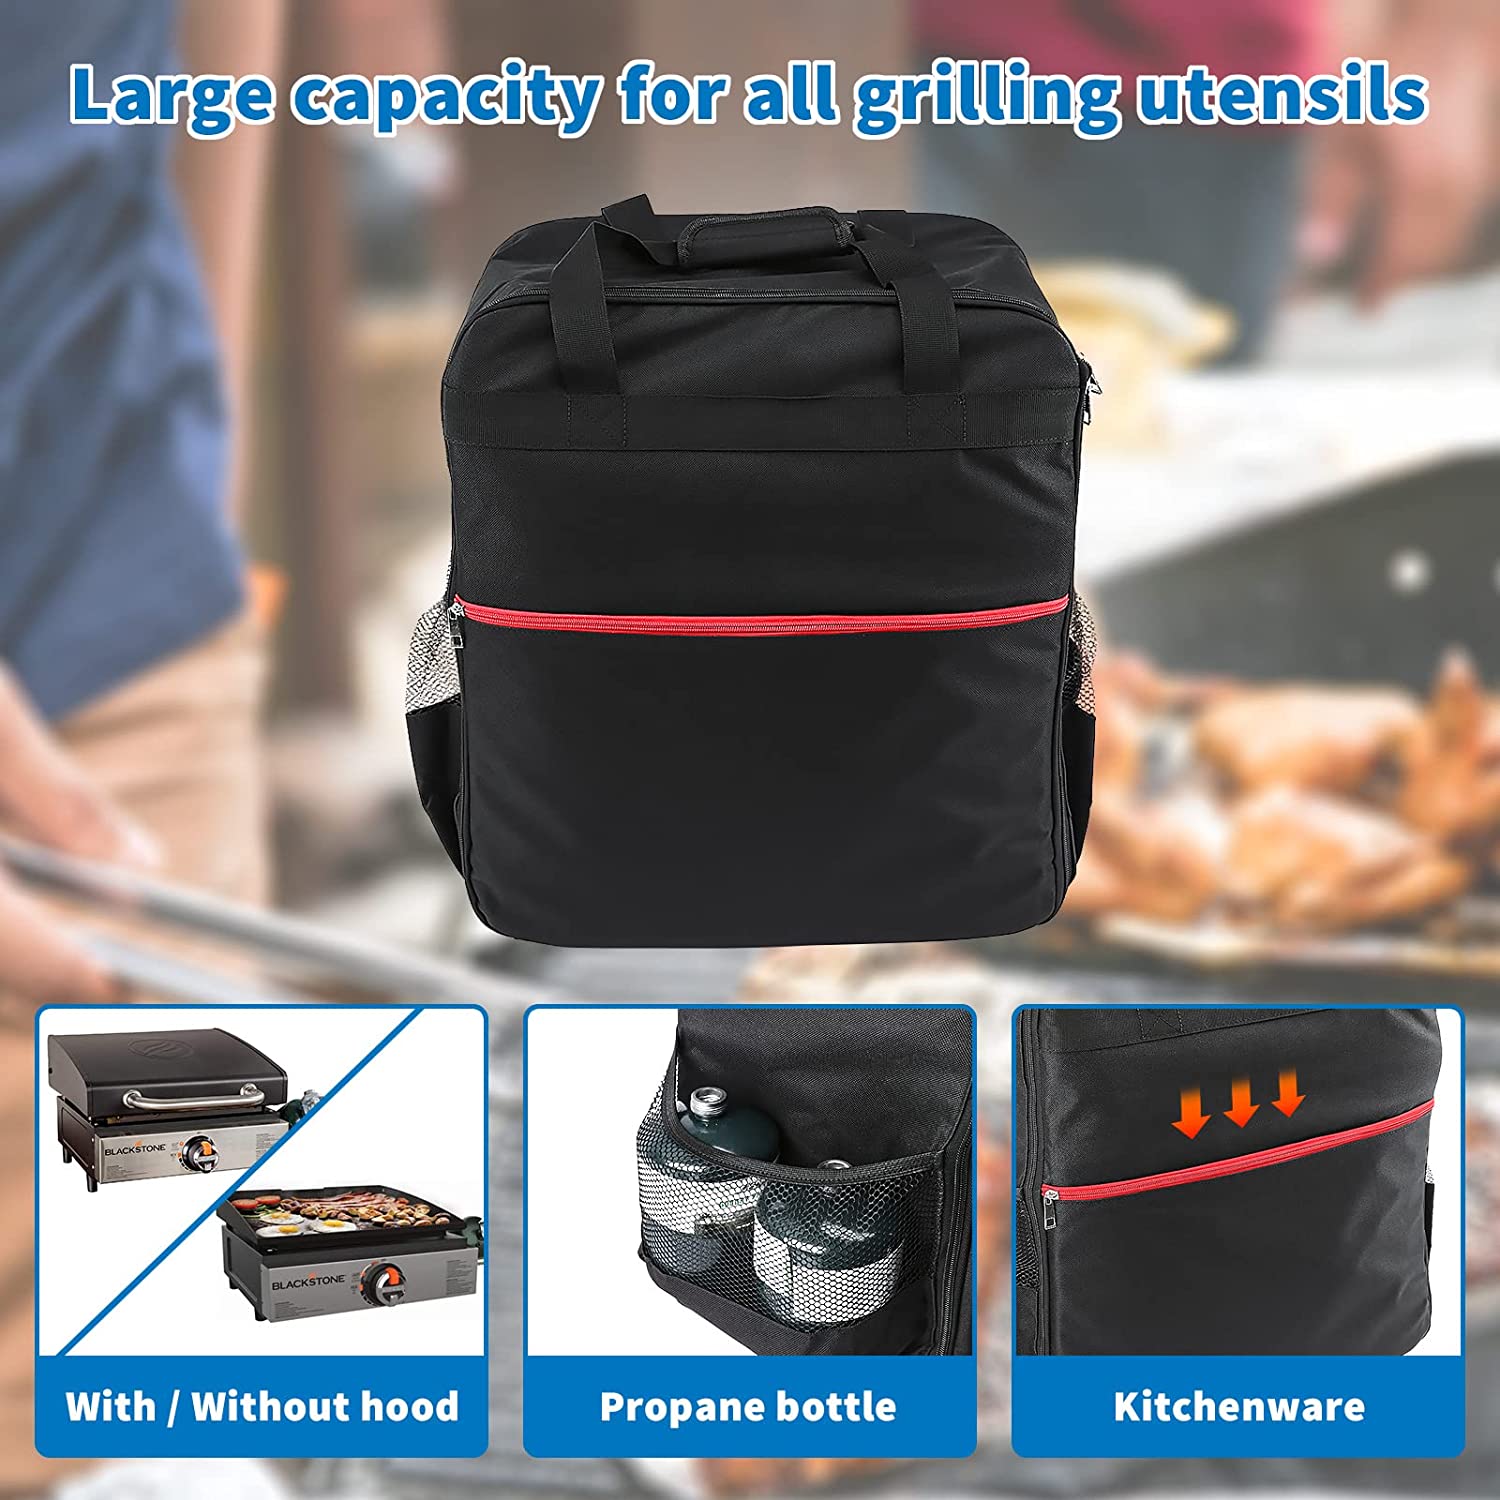 Blackstone Heavy Duty 17 Tabletop Griddle Carry Bag with Shoulder Strap